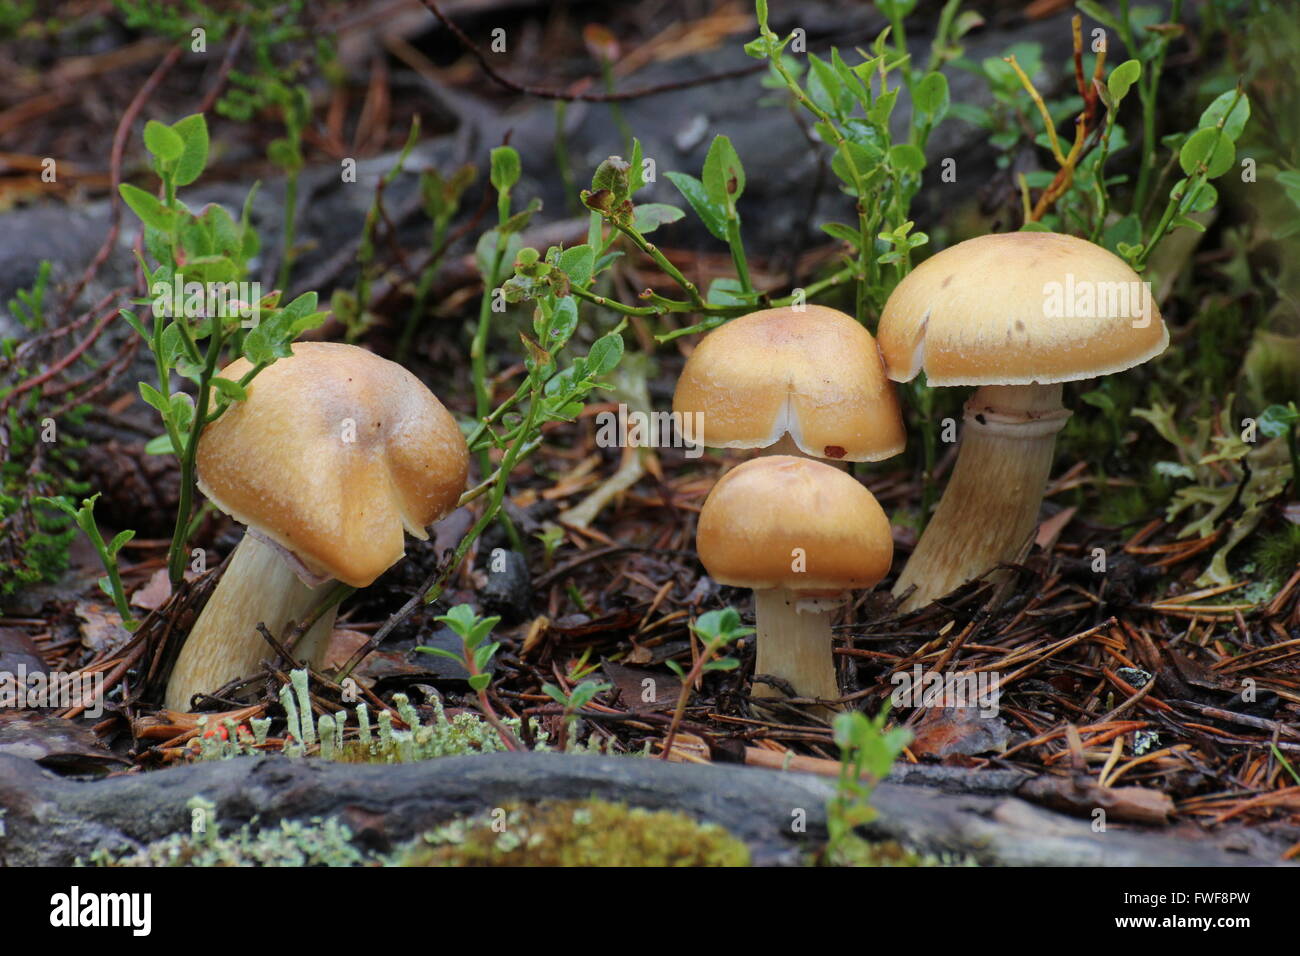 A group of mushrooms in Sweden. Stock Photo